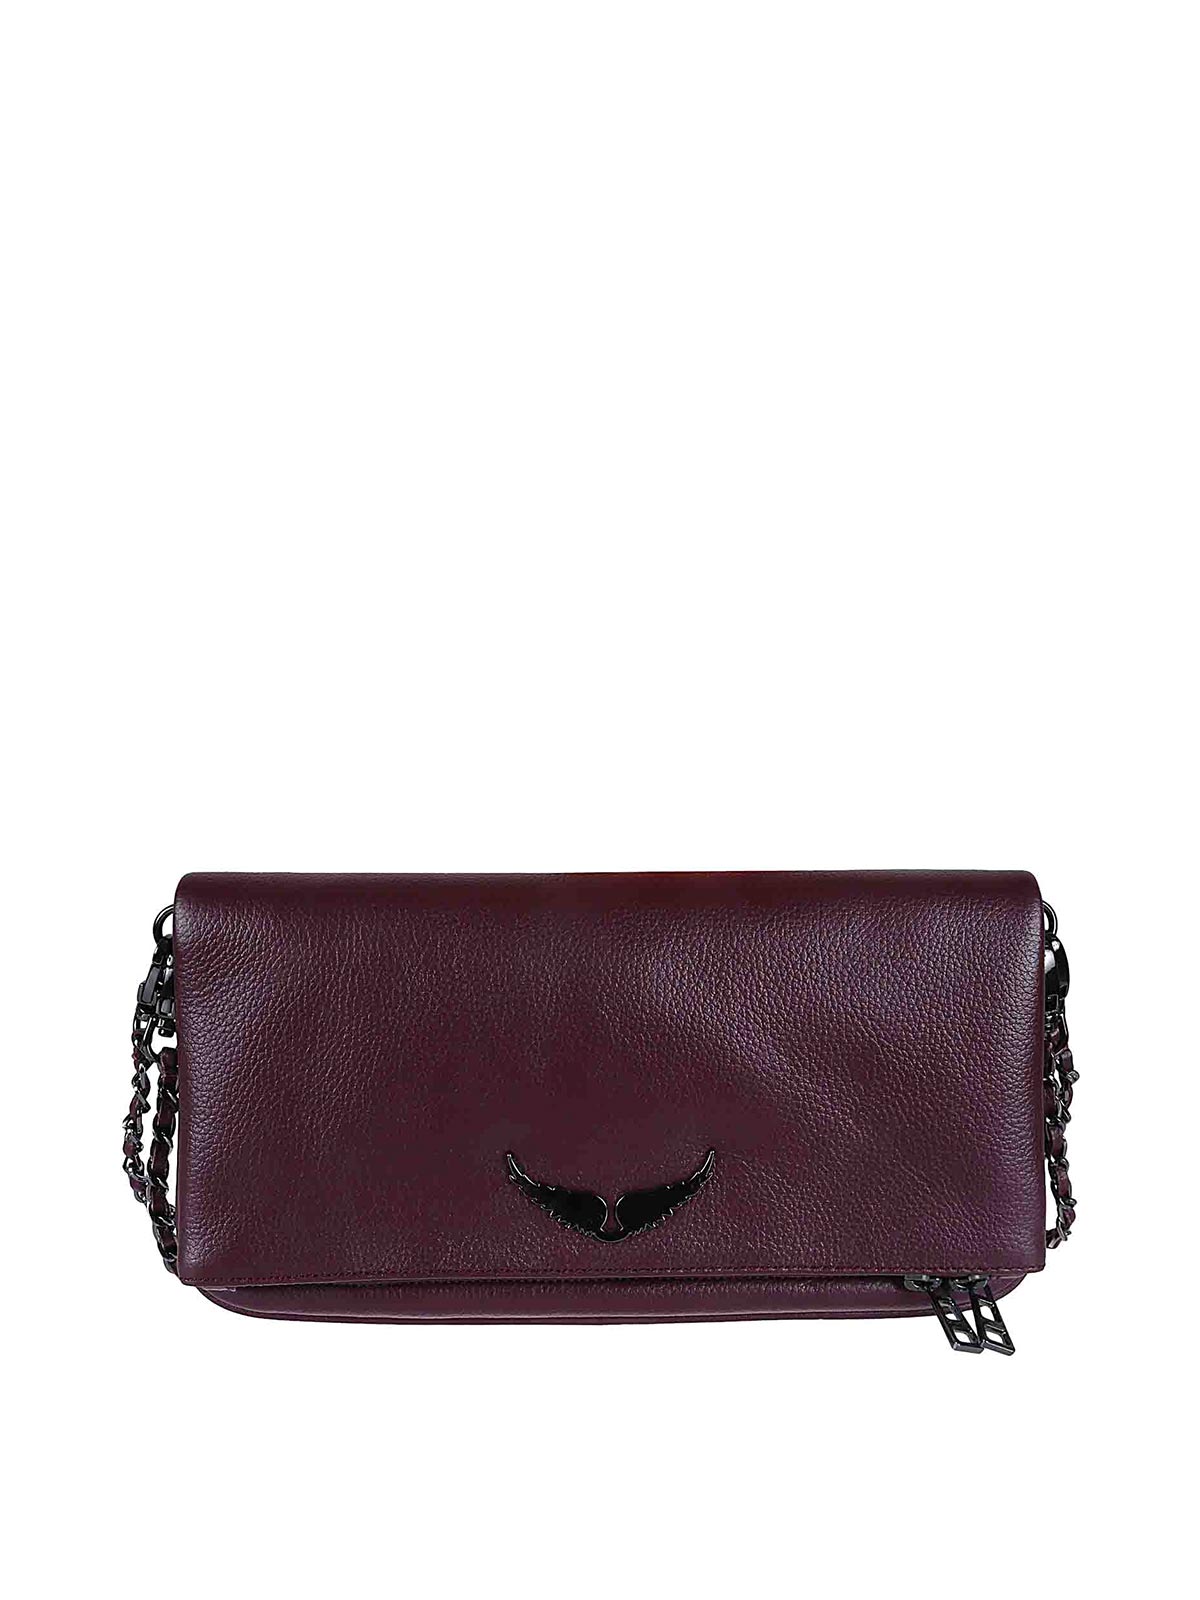 Cross body bags Zadig&Voltaire - grained leather bag - LWBA00001507